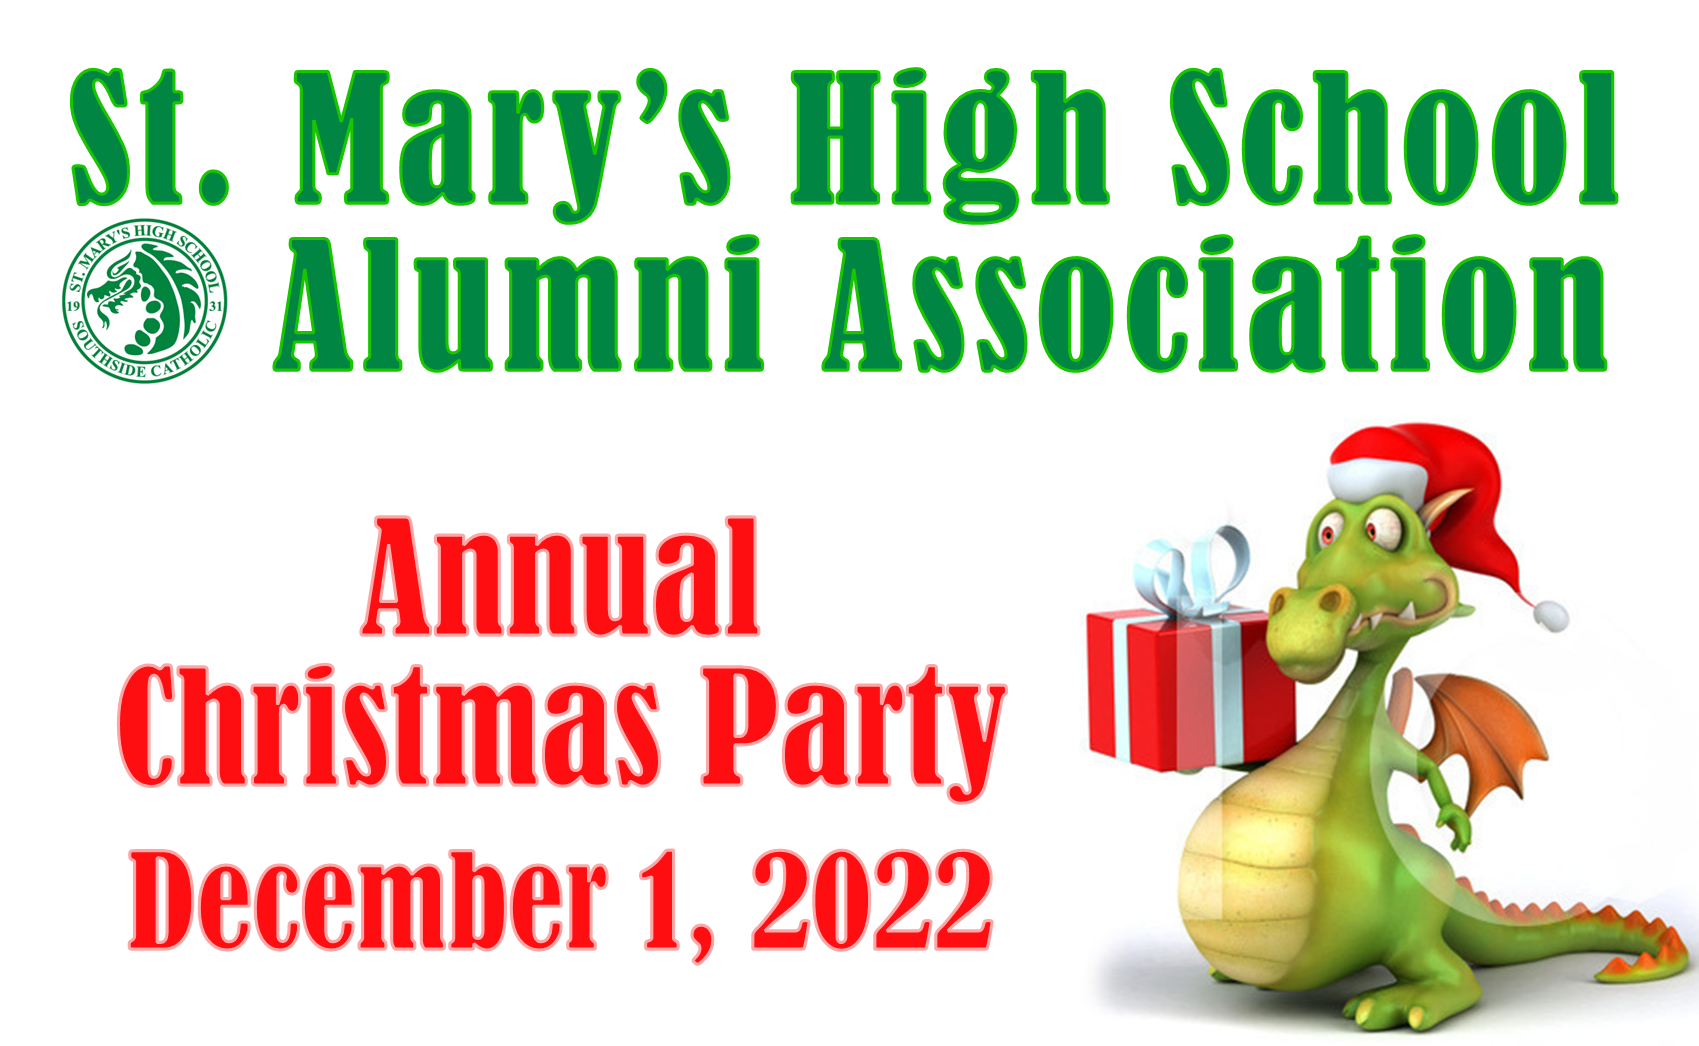 Alumni Christmas Party on December 1st